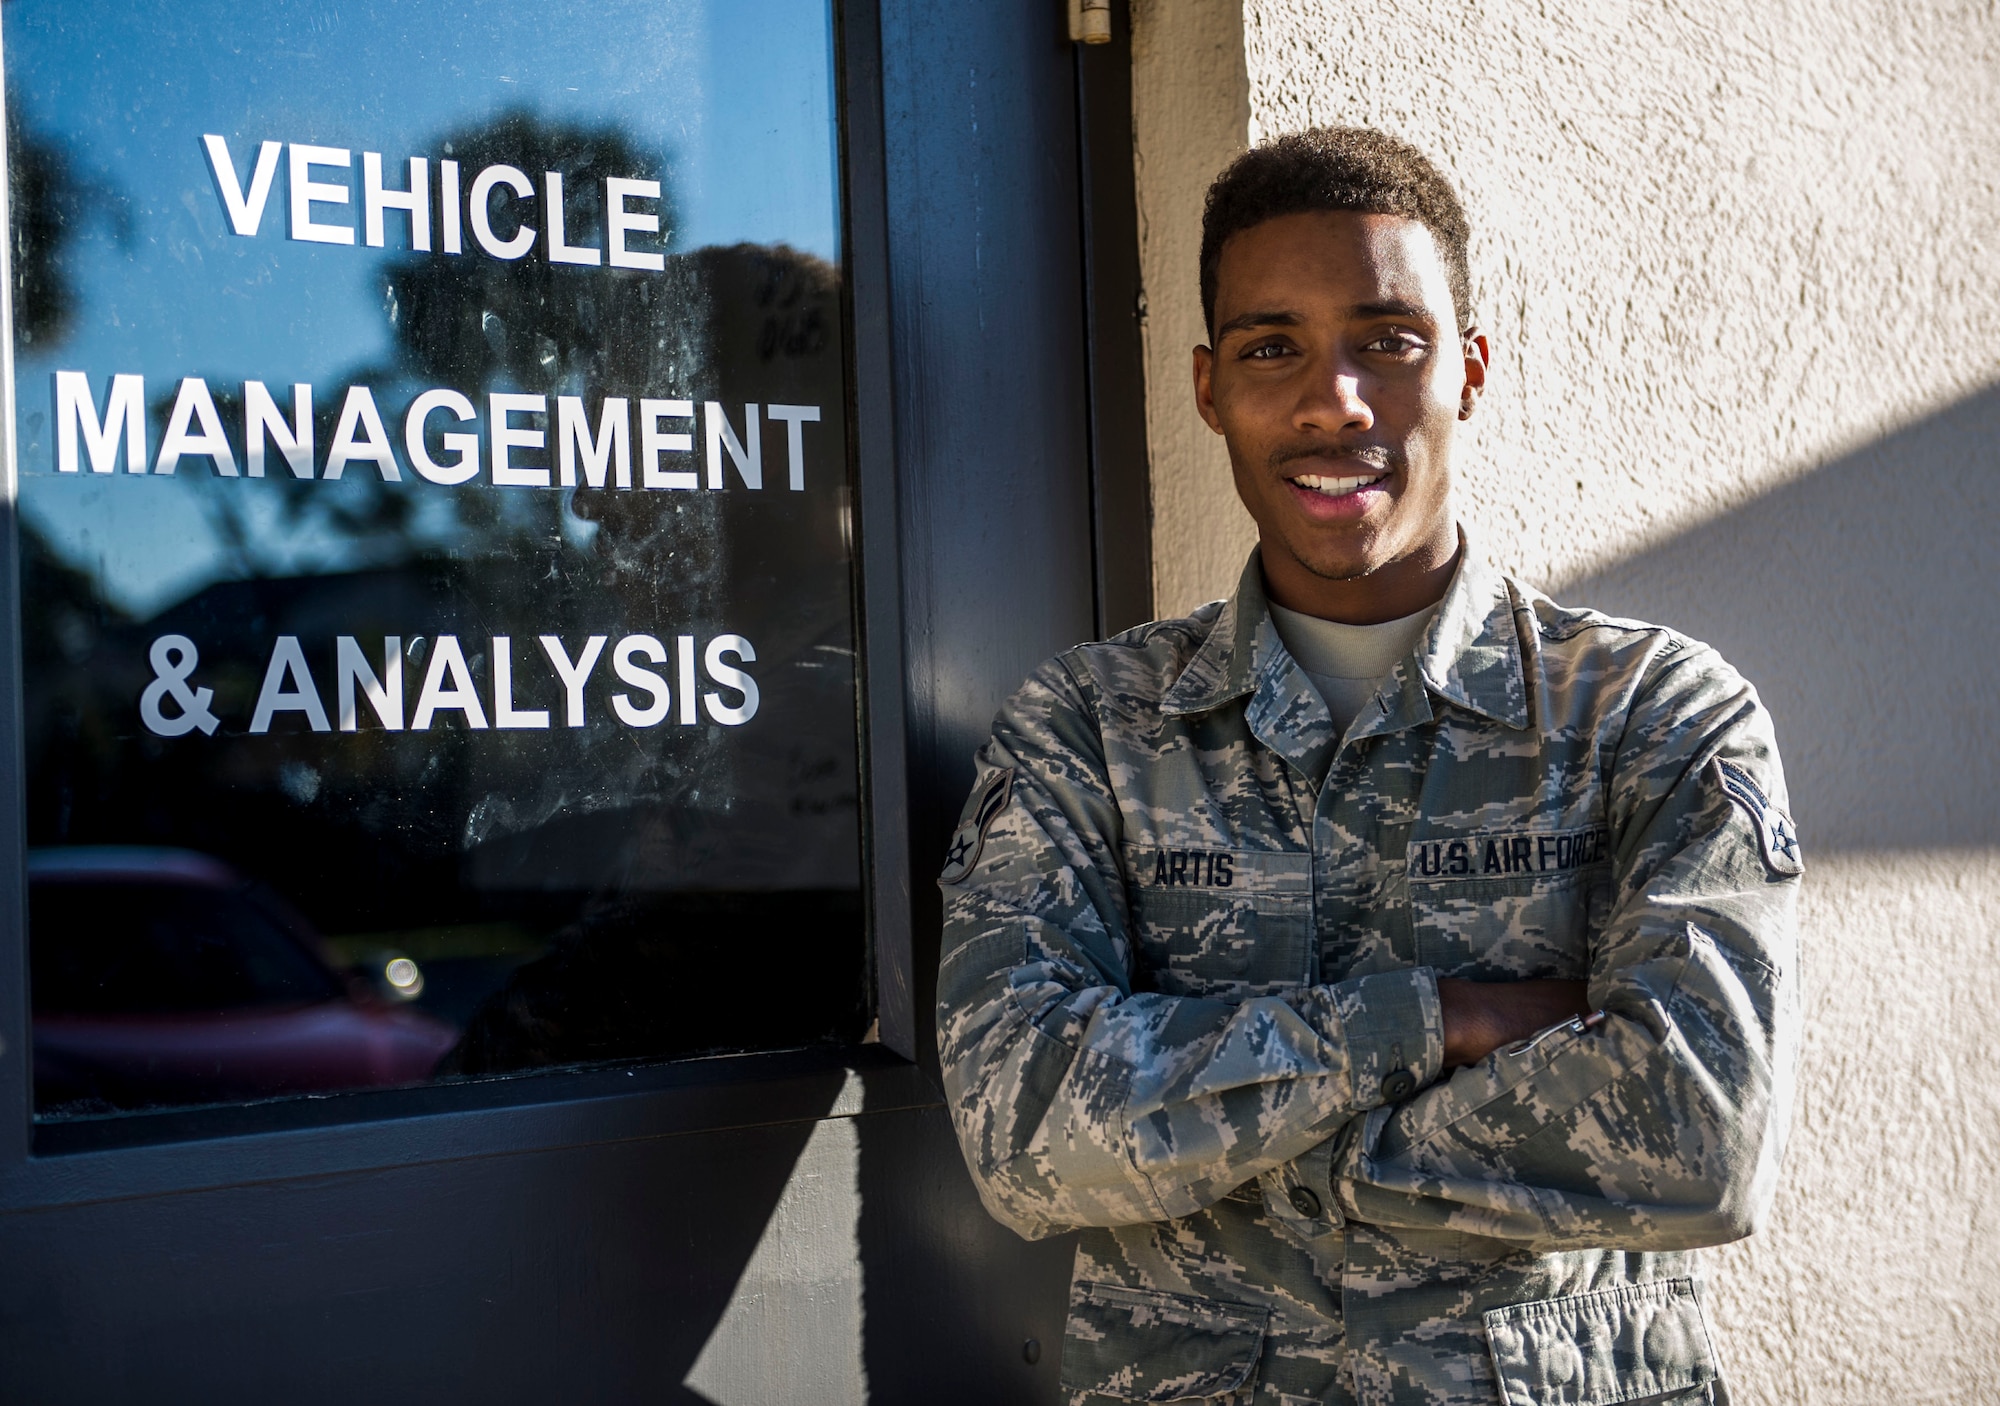 Airman 1st Class Jordan Artis, a vehicle management analysis journeyman with the 1st Special Operations Logistics Readiness Squadron, poses for a photo at Hurlburt Field, Fla., Jan. 12, 2016. Artis is in charge of the VCO program. (U.S. Air Force photo by Senior Airman Krystal M. Garrett)